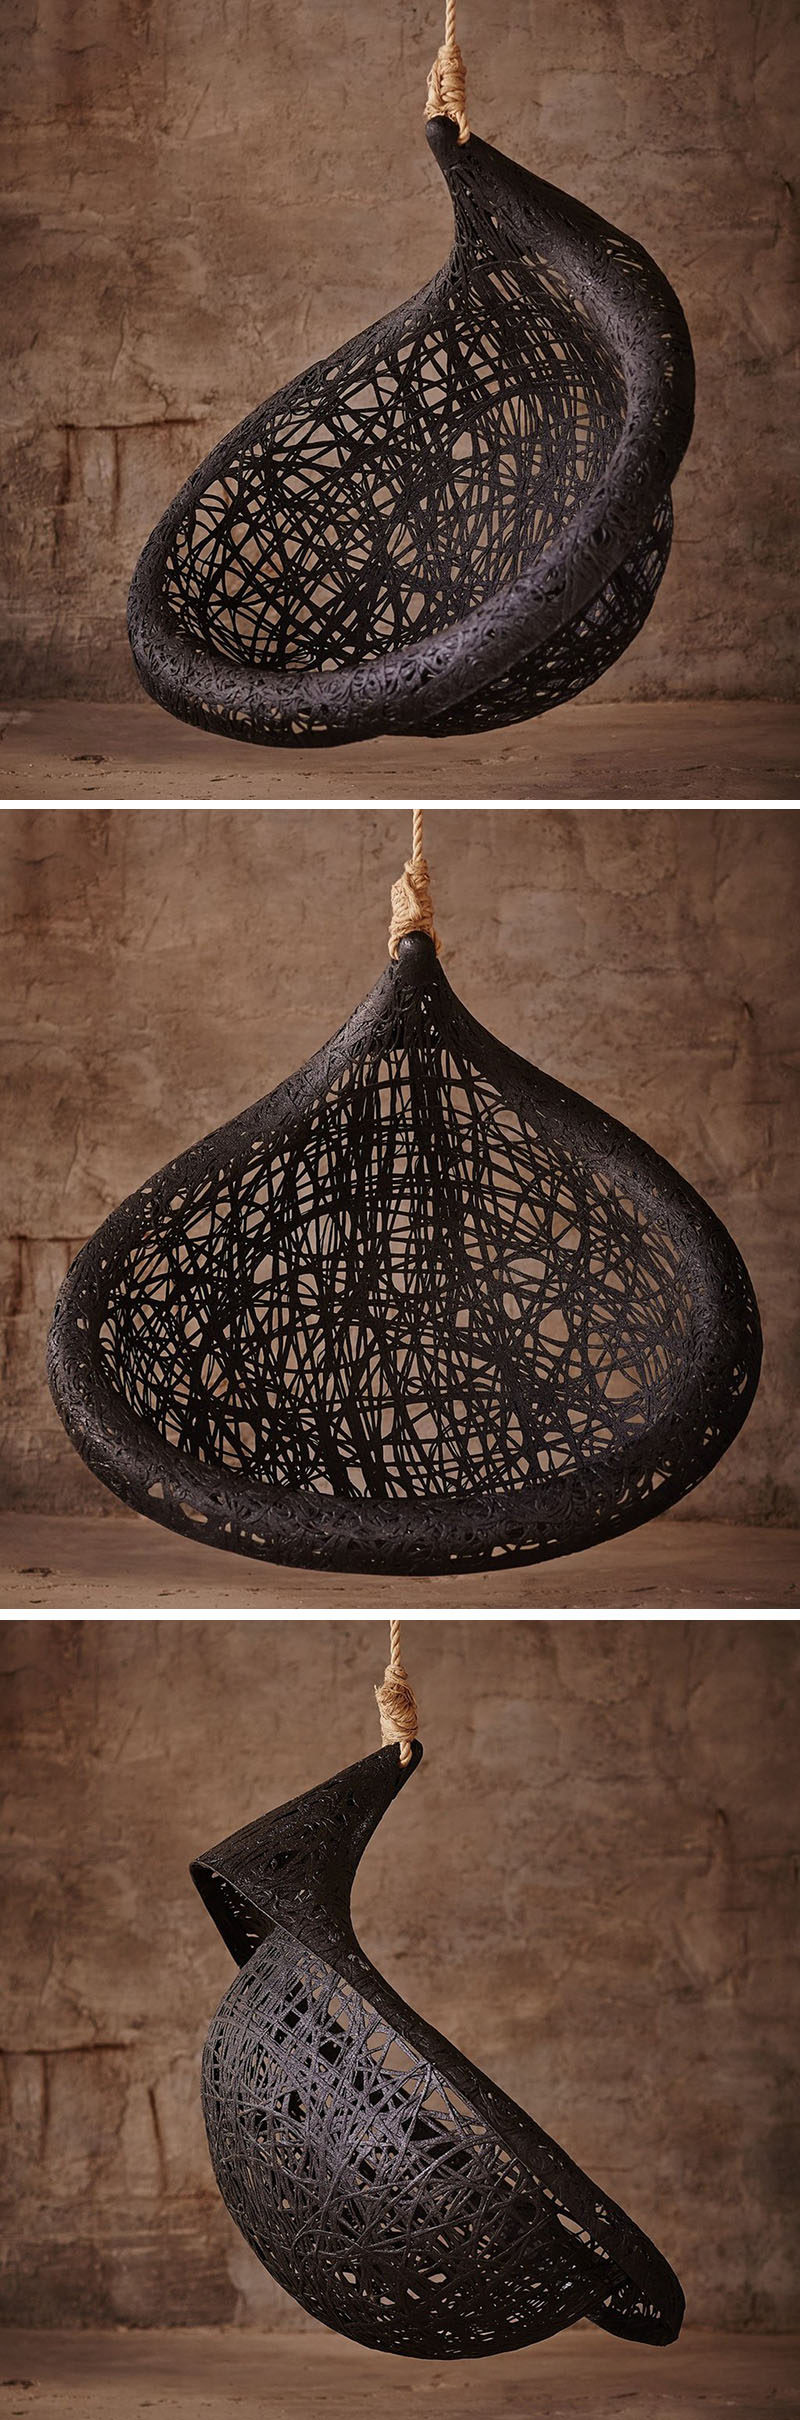 Designer Raimonds Cirulis of Maffam has created the dramatic looking Ibis Hanging Chair, that's made from volcanic basalt fibre and natural resin.